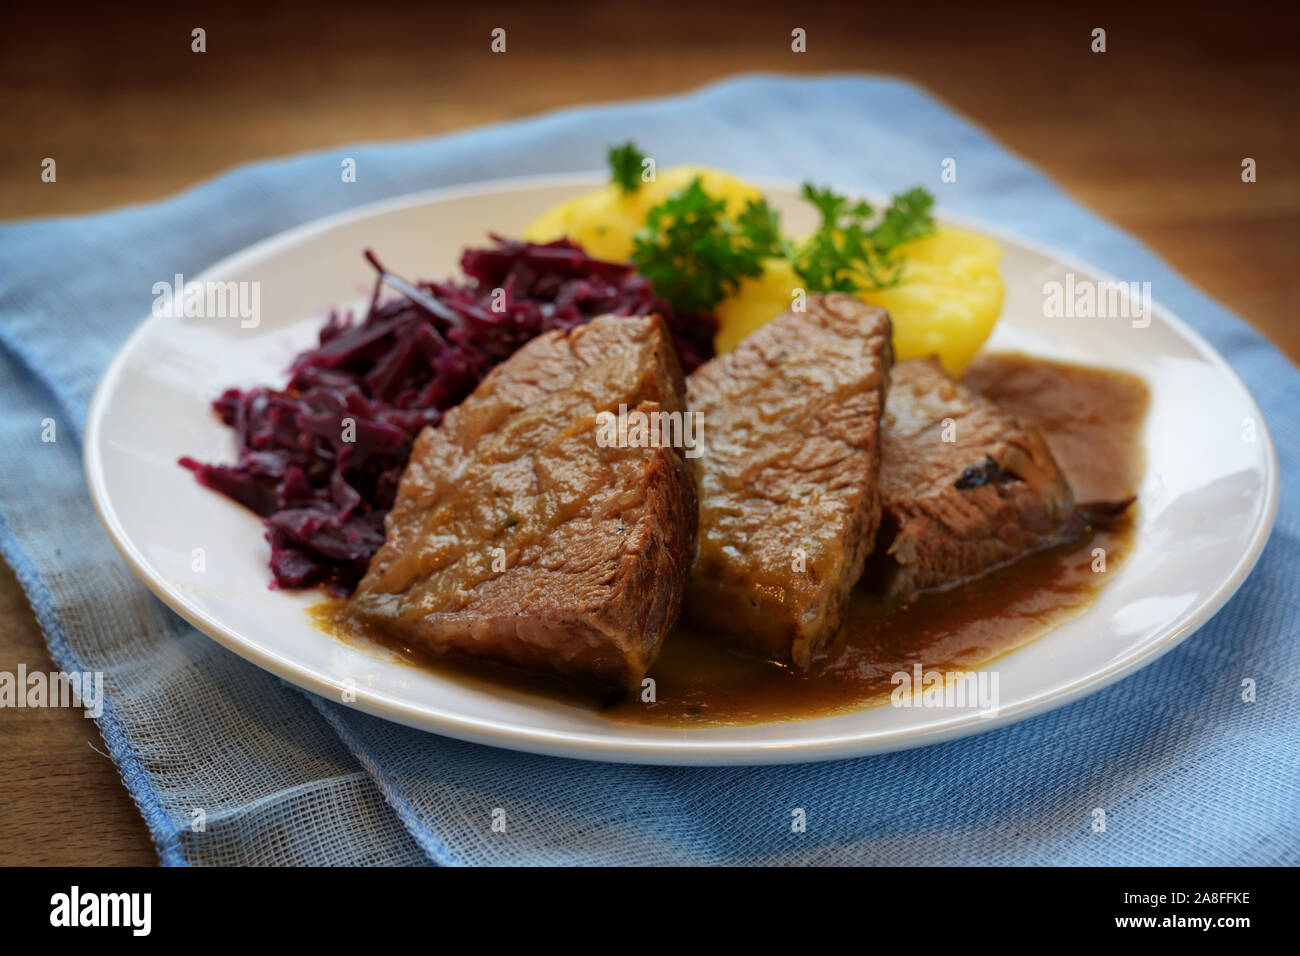 braised beef with sauce, potatoes and red cabbage, served on a white plate and blue napkin on a rustic wooden table, selected focus, very narrow depth Stock Photo